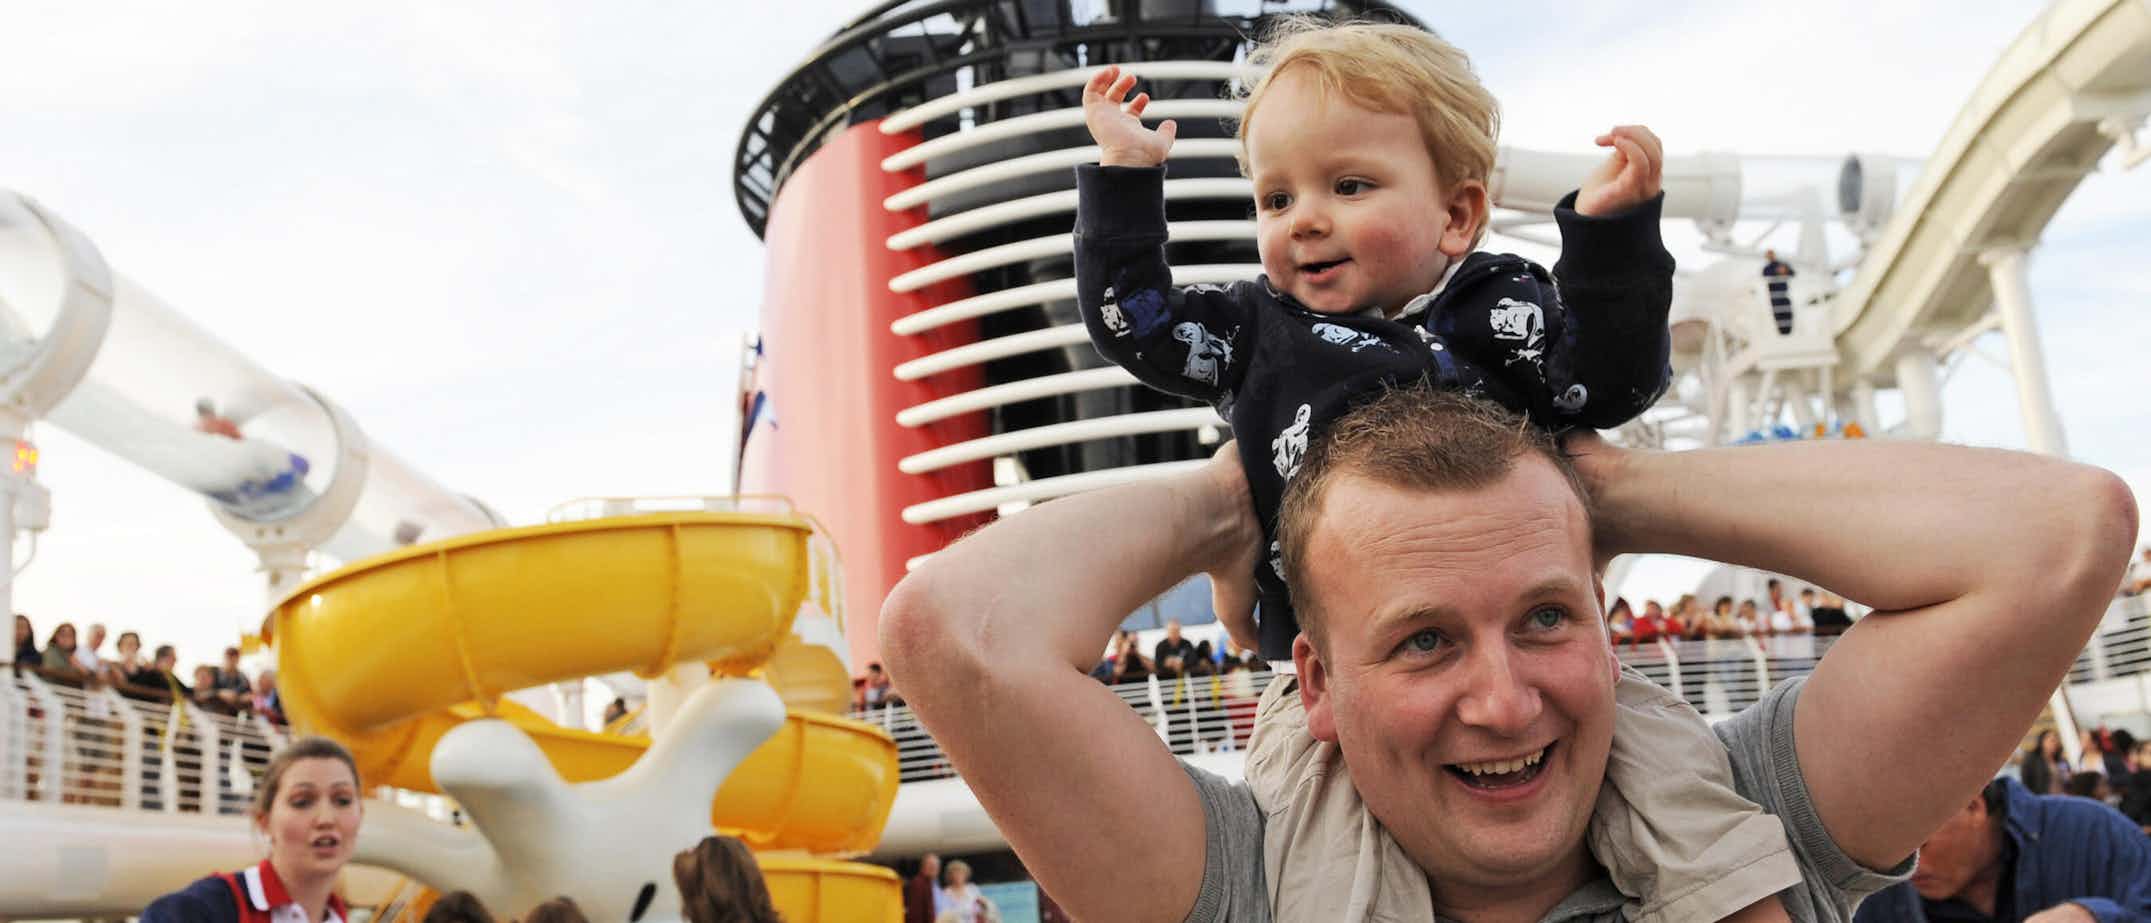 23 Disney Cruise Line products you need for the whole family